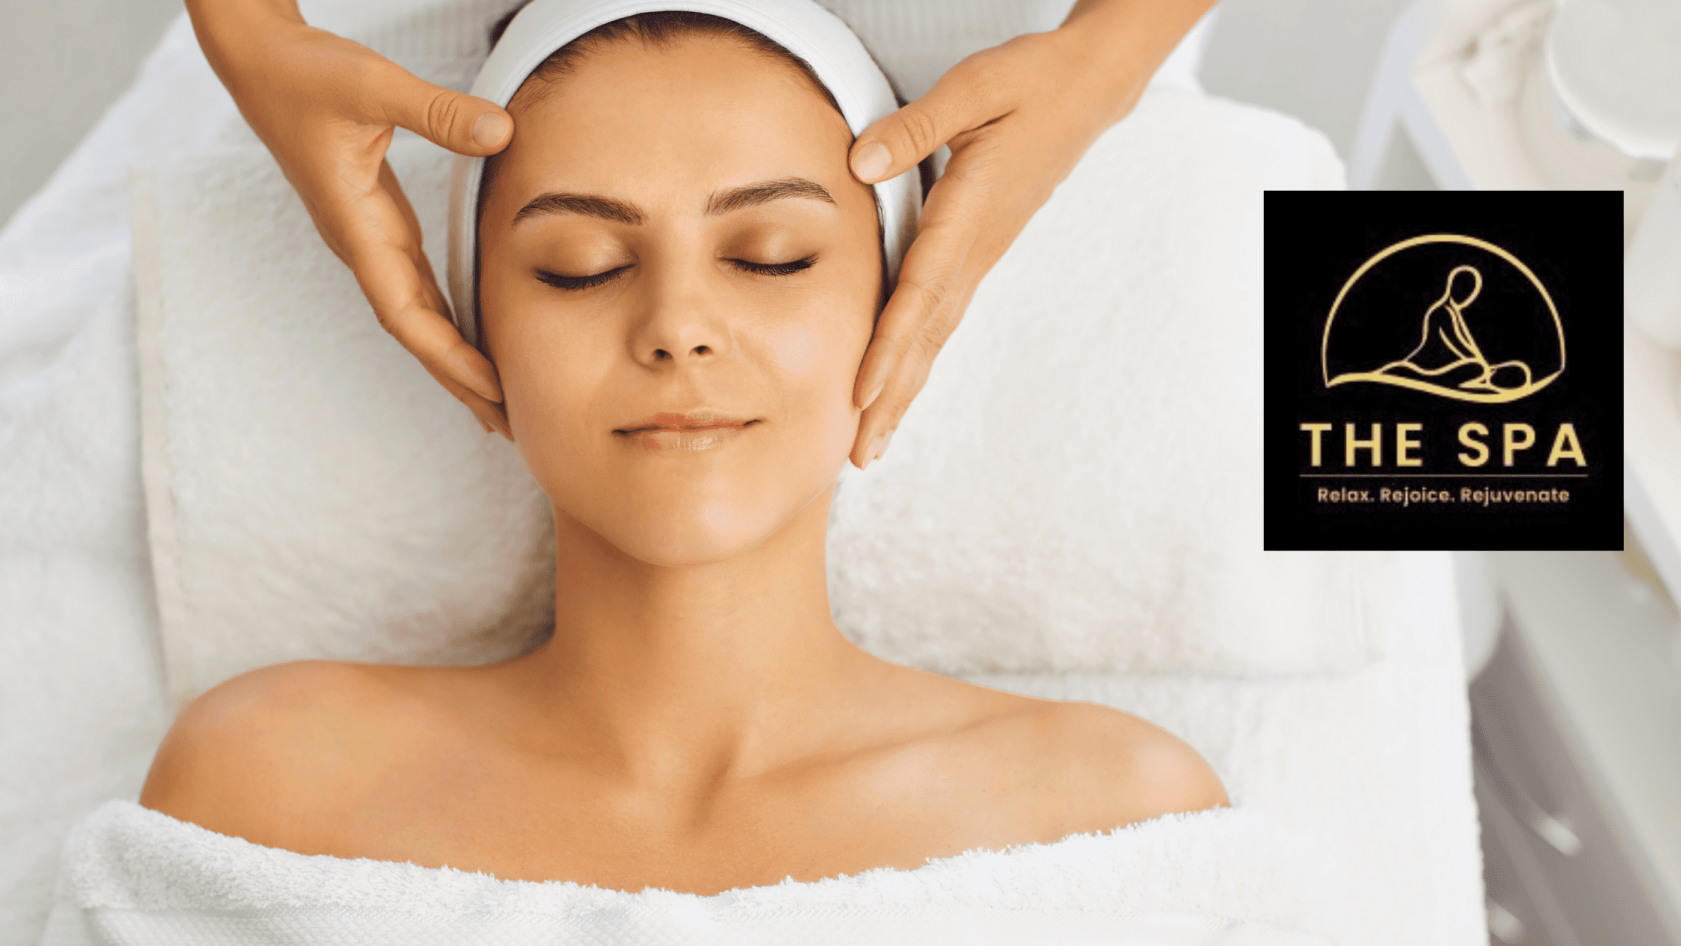 Rejuvenate Your Body and Mind With Spa Treatment.